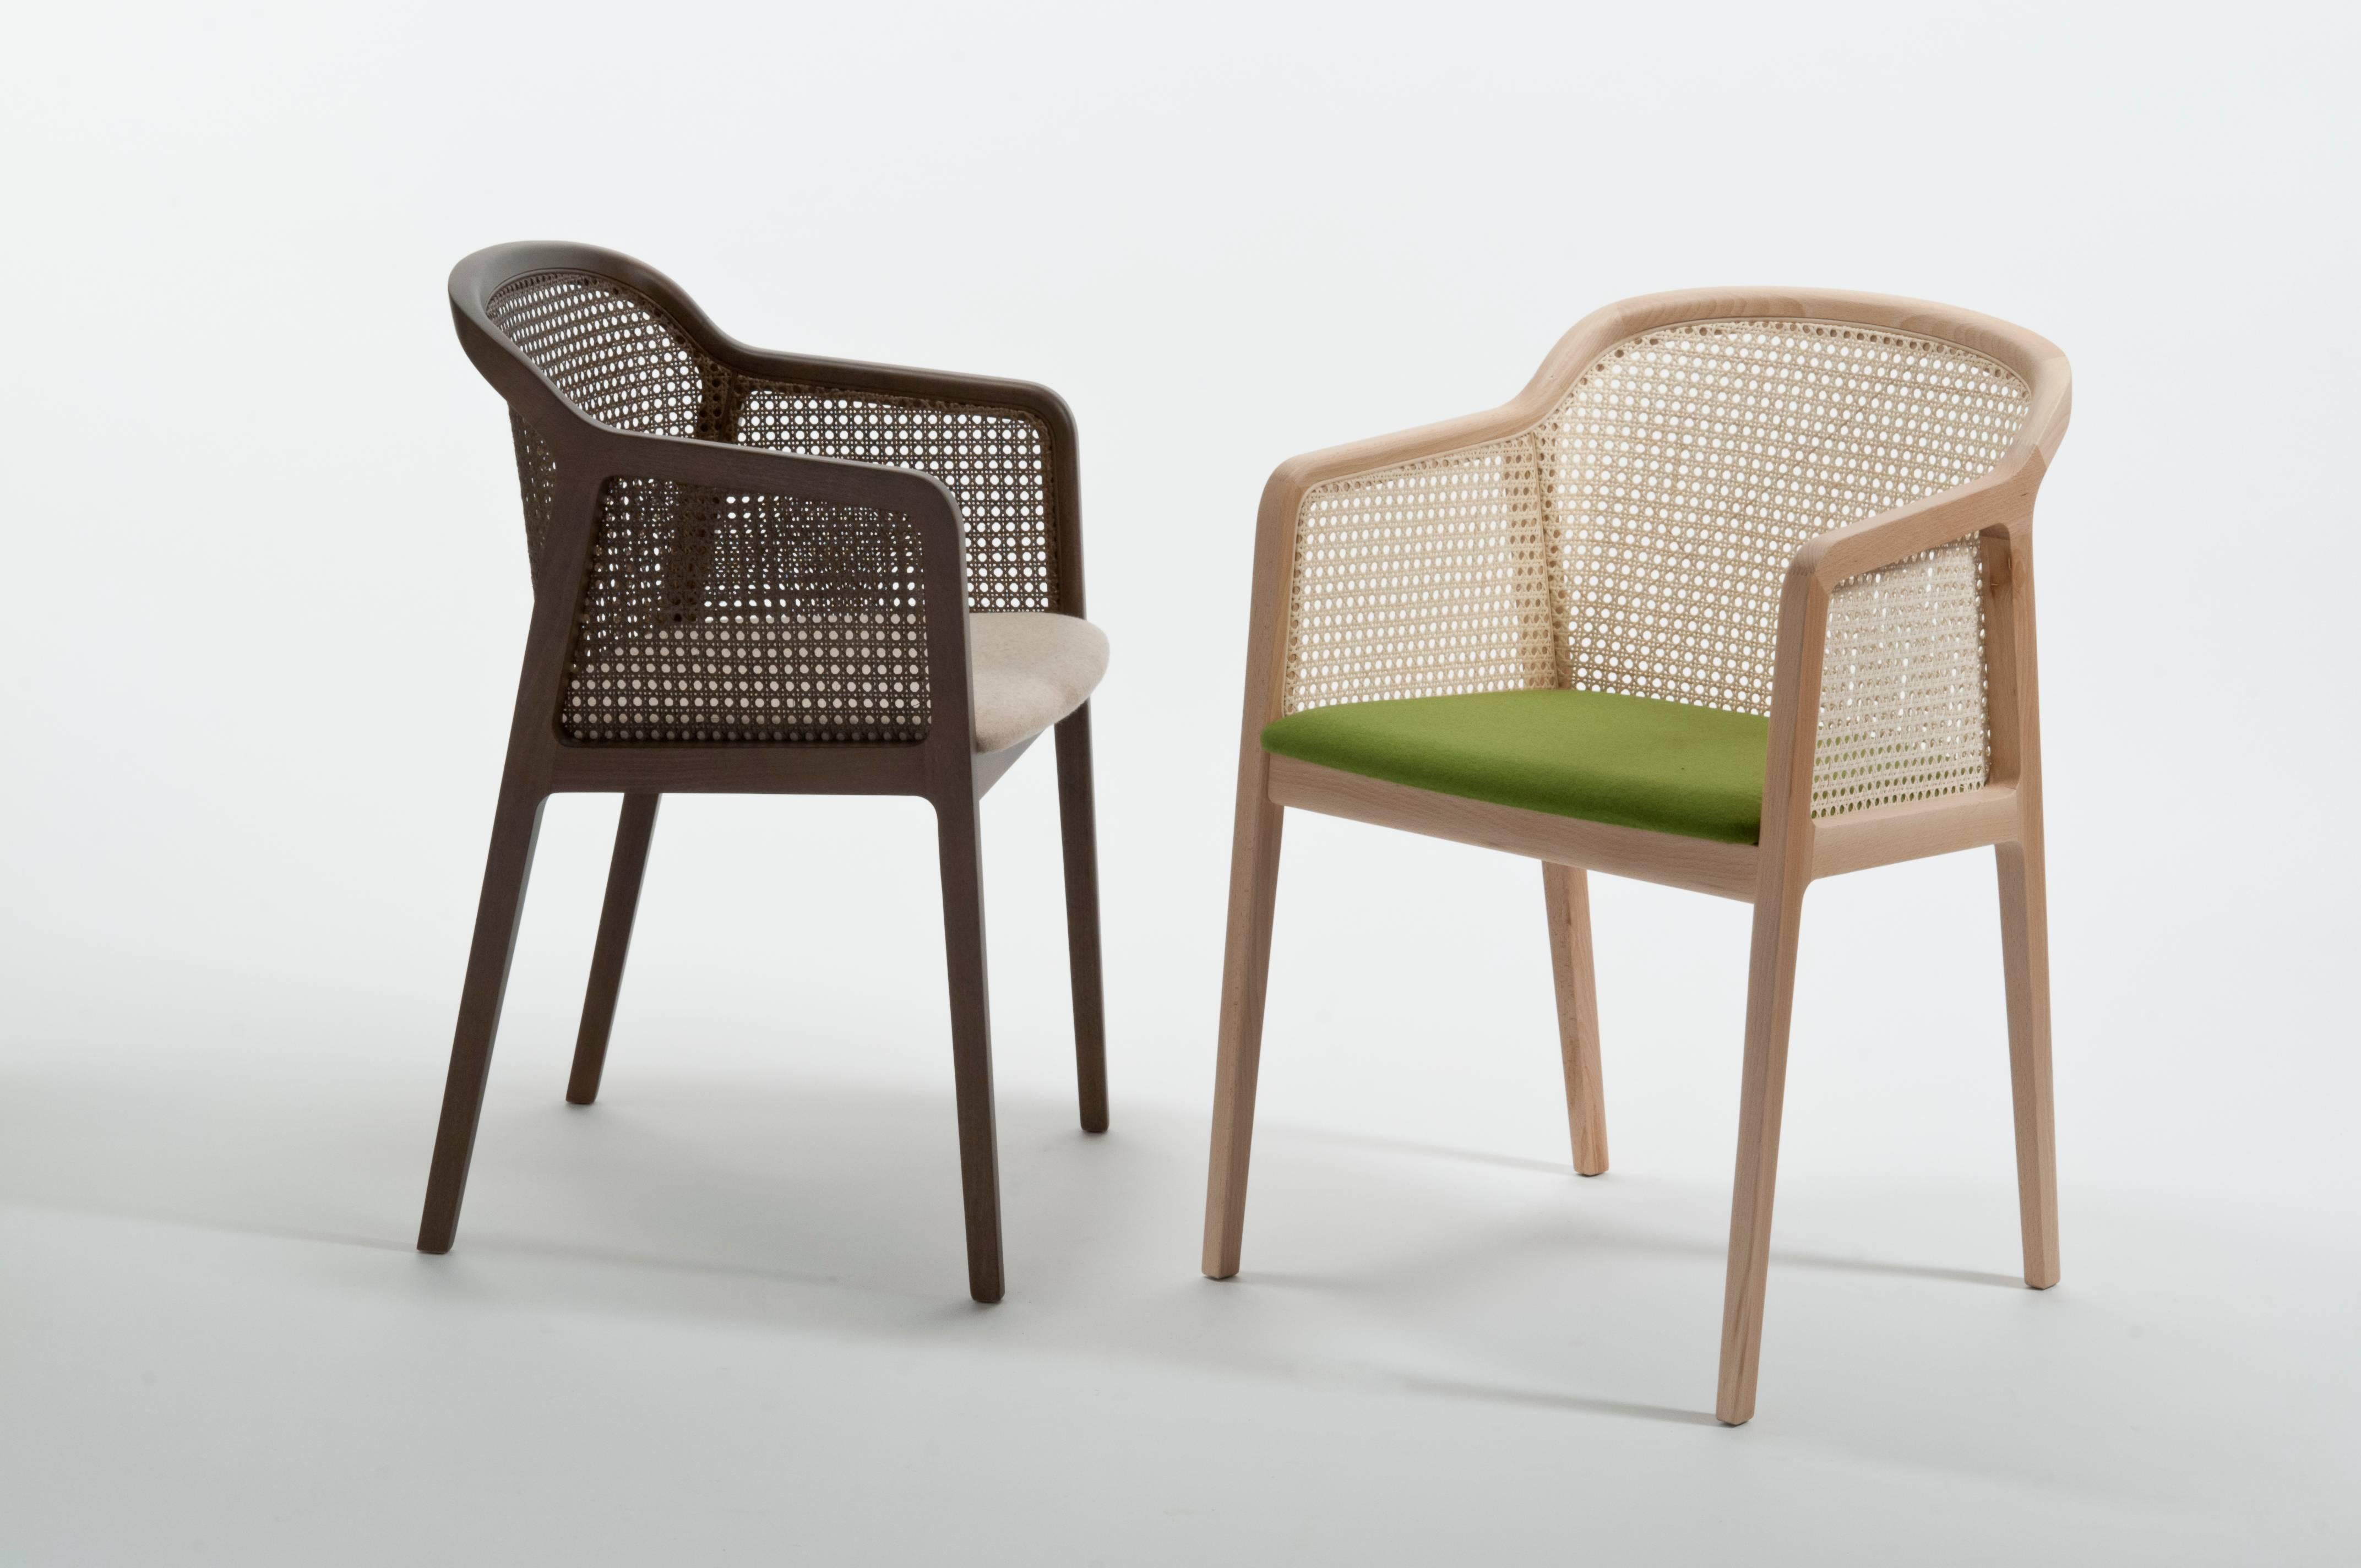 Vienna Armchair by Colé, Modernity Design in Wood and Straw, Green Upholstered Seat en vente 6